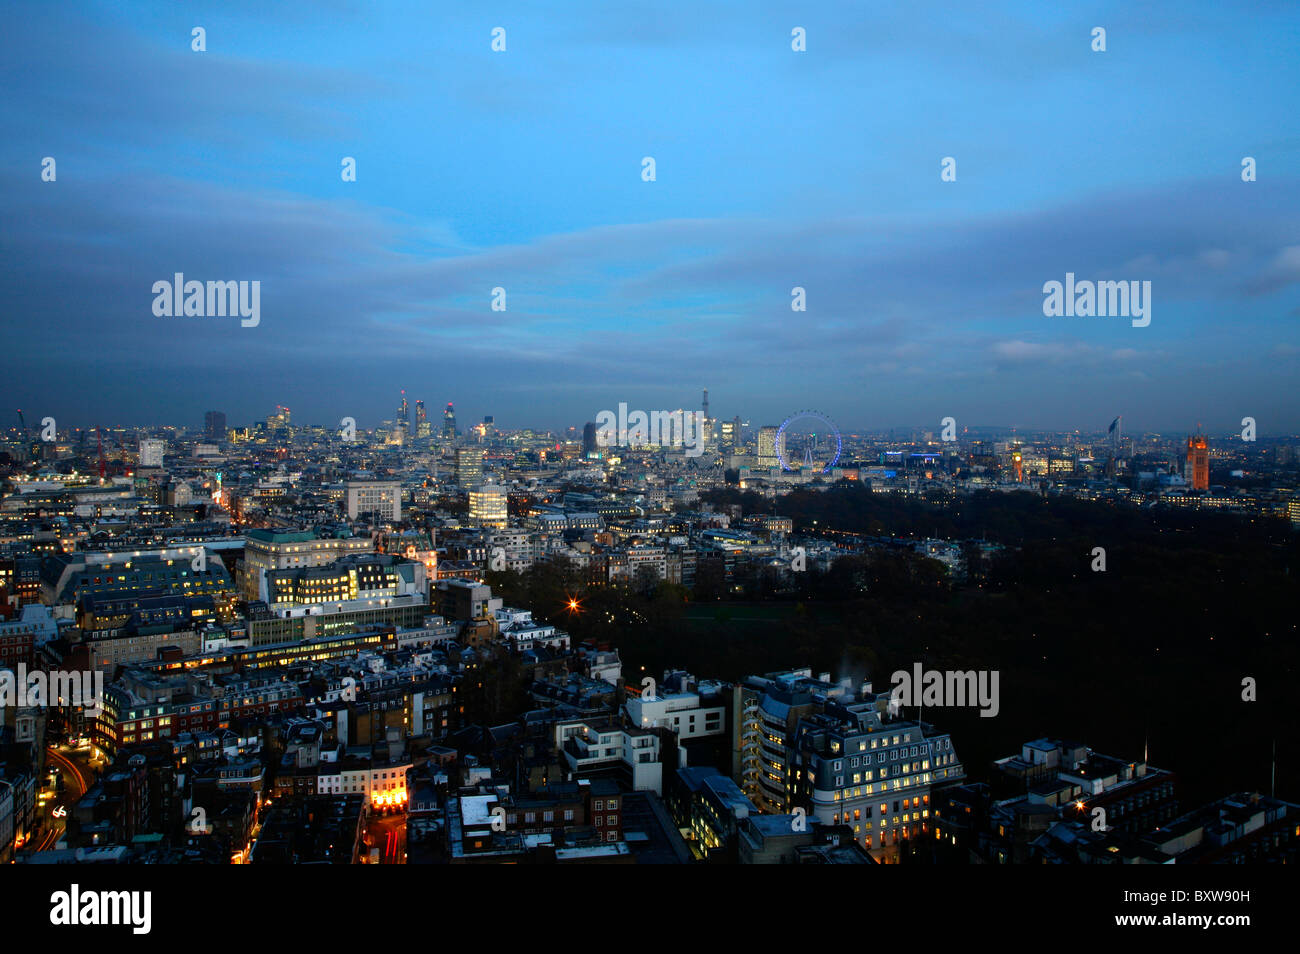 Panoramic view taken looking east to the West End, Houses of Parliament, London Eye and the City of London, London, UK Stock Photo